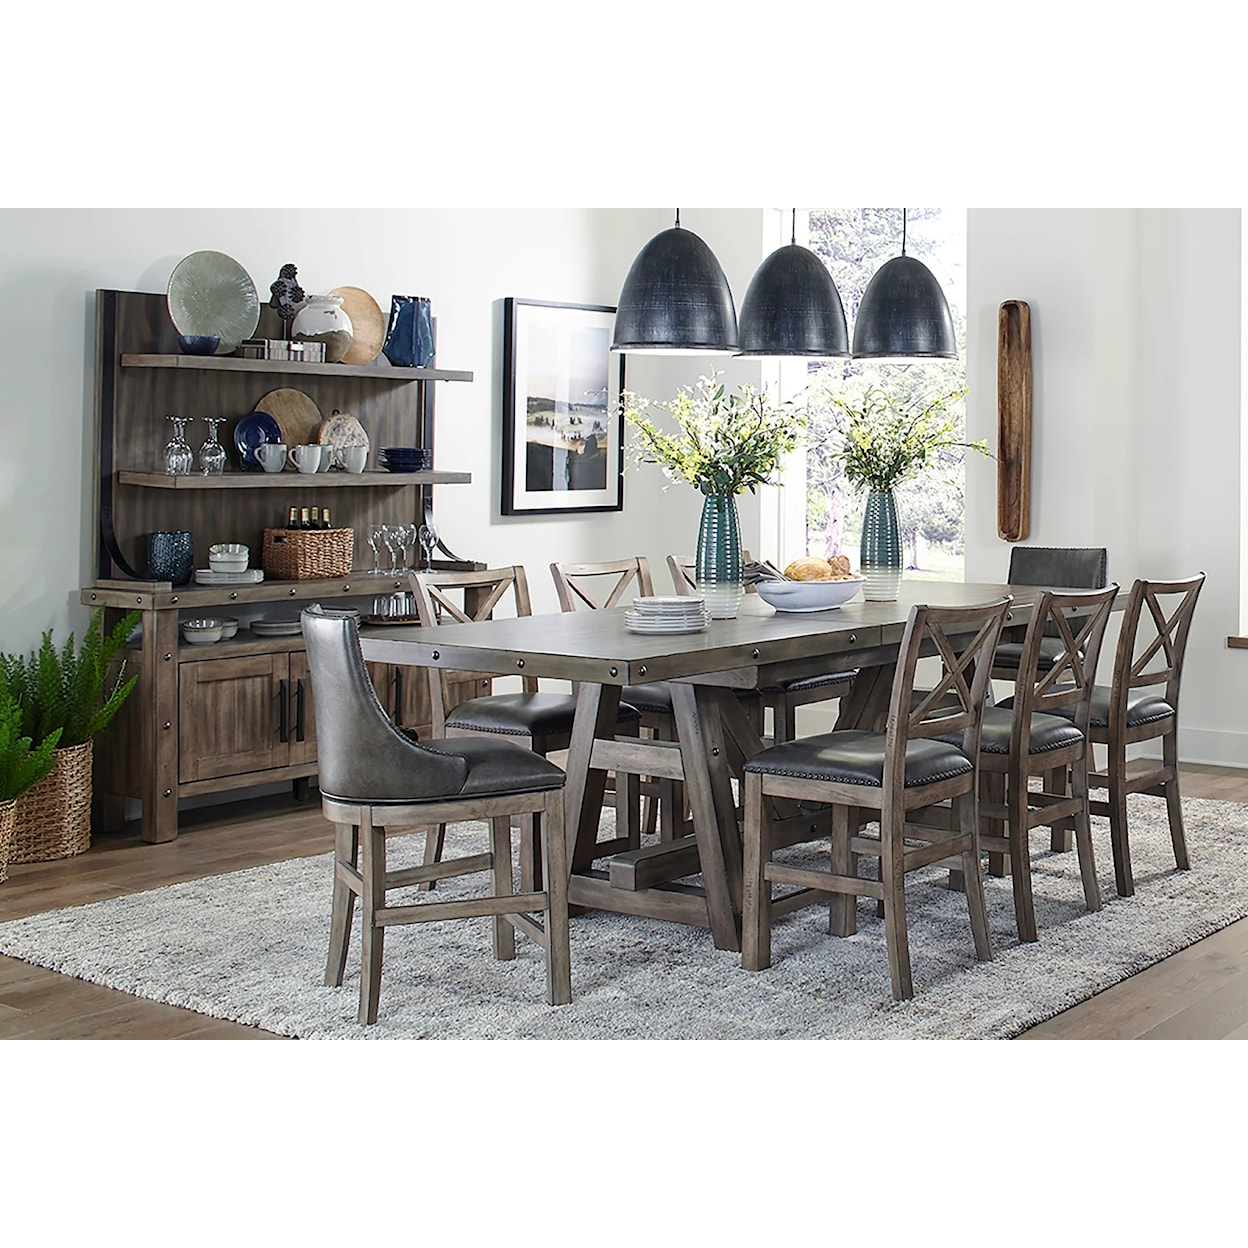 Paramount Furniture Lodge 12-Piece Counter Height Table Set